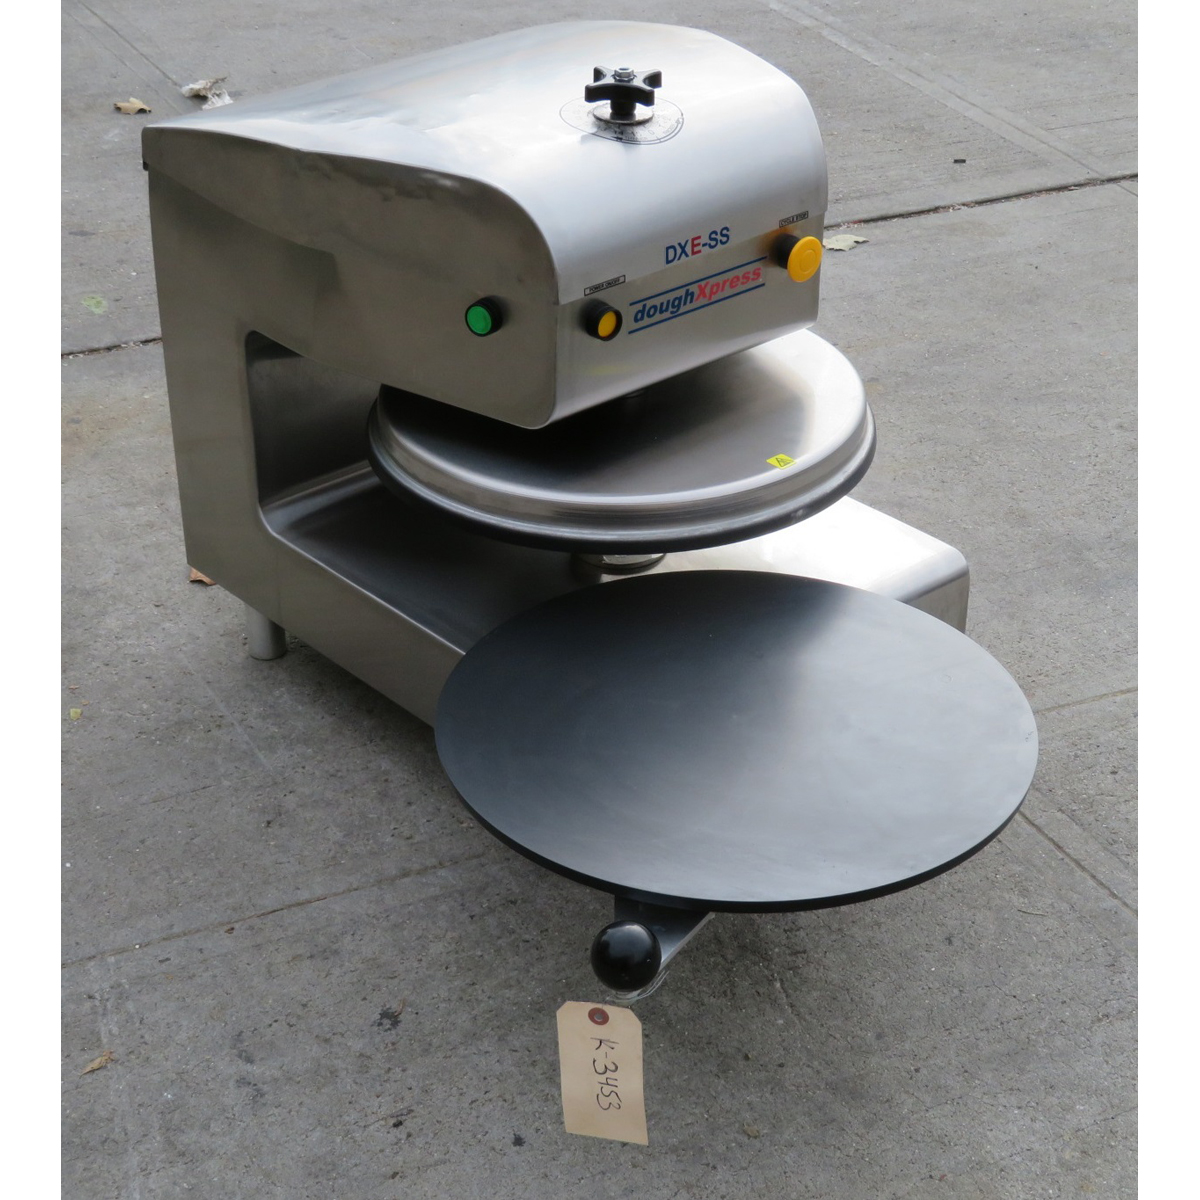 DoughXpress DXE-SS Pizza Press, Used Excellent Condition image 4